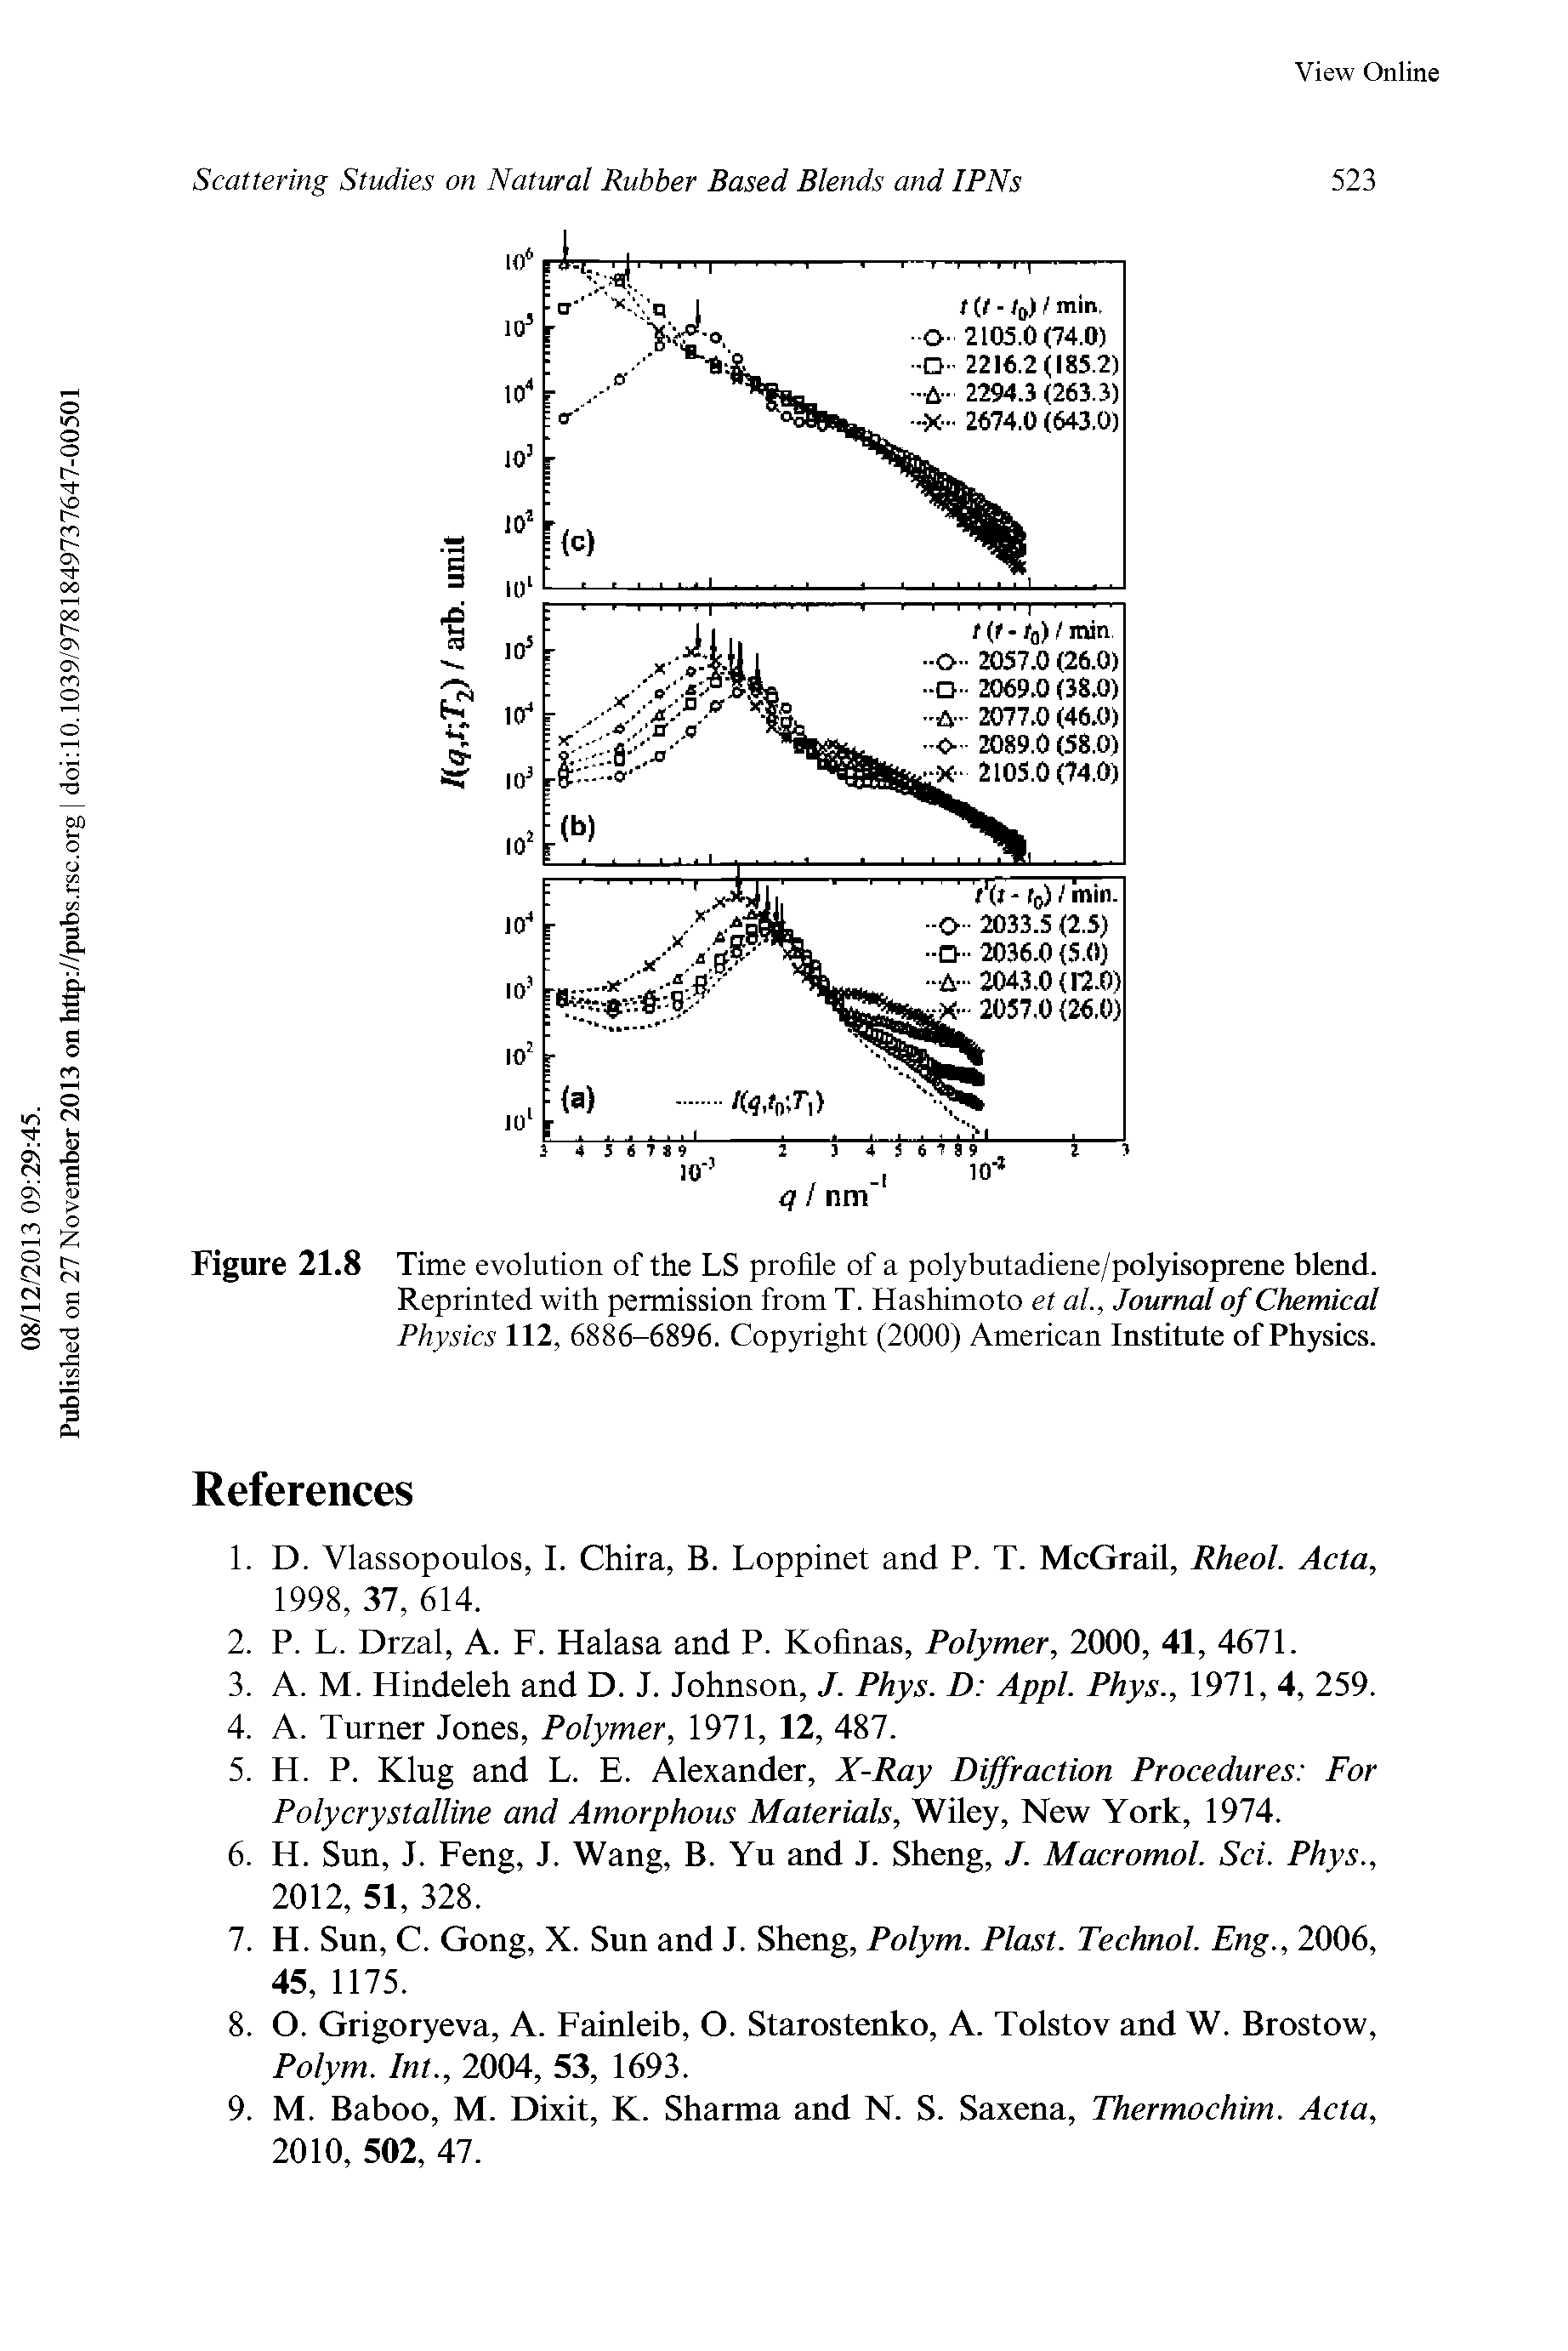 Figure 21.8 Time evolution of the LS profile of a polybutadiene/polyisoprene blend.